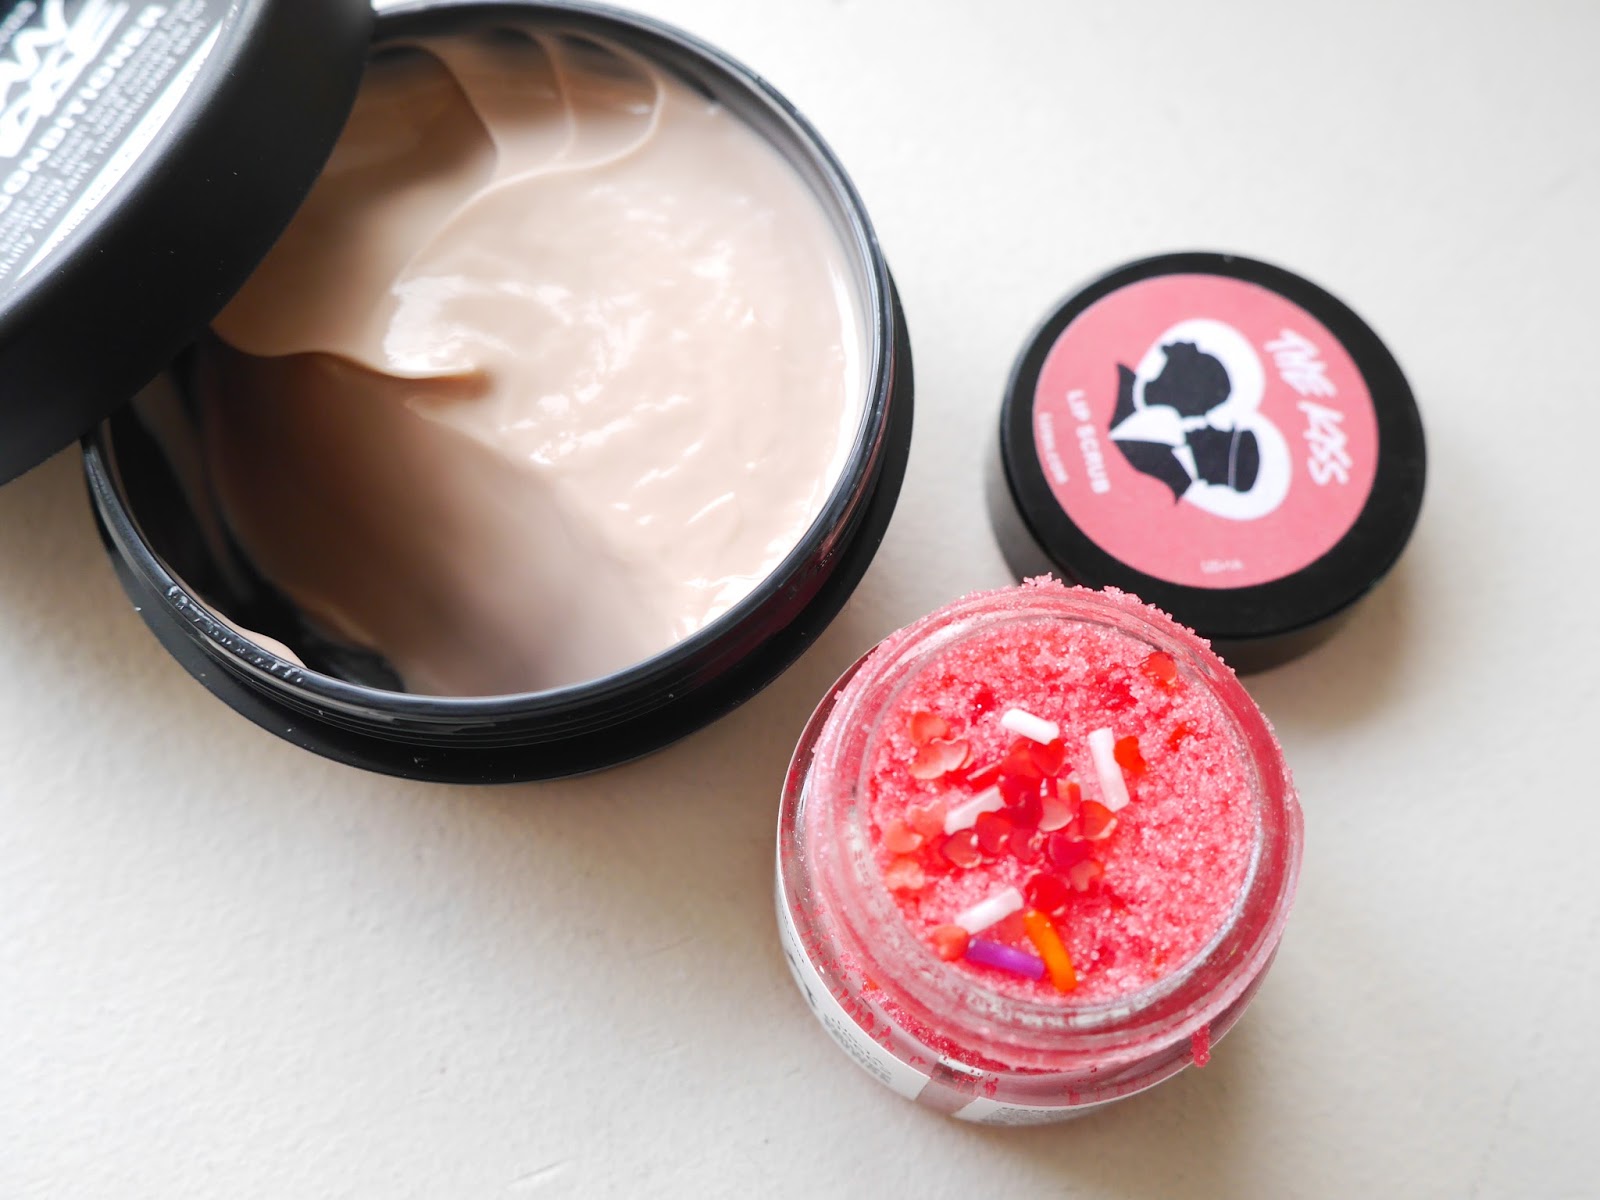 lush african paradise body condition the kiss lip scrub review